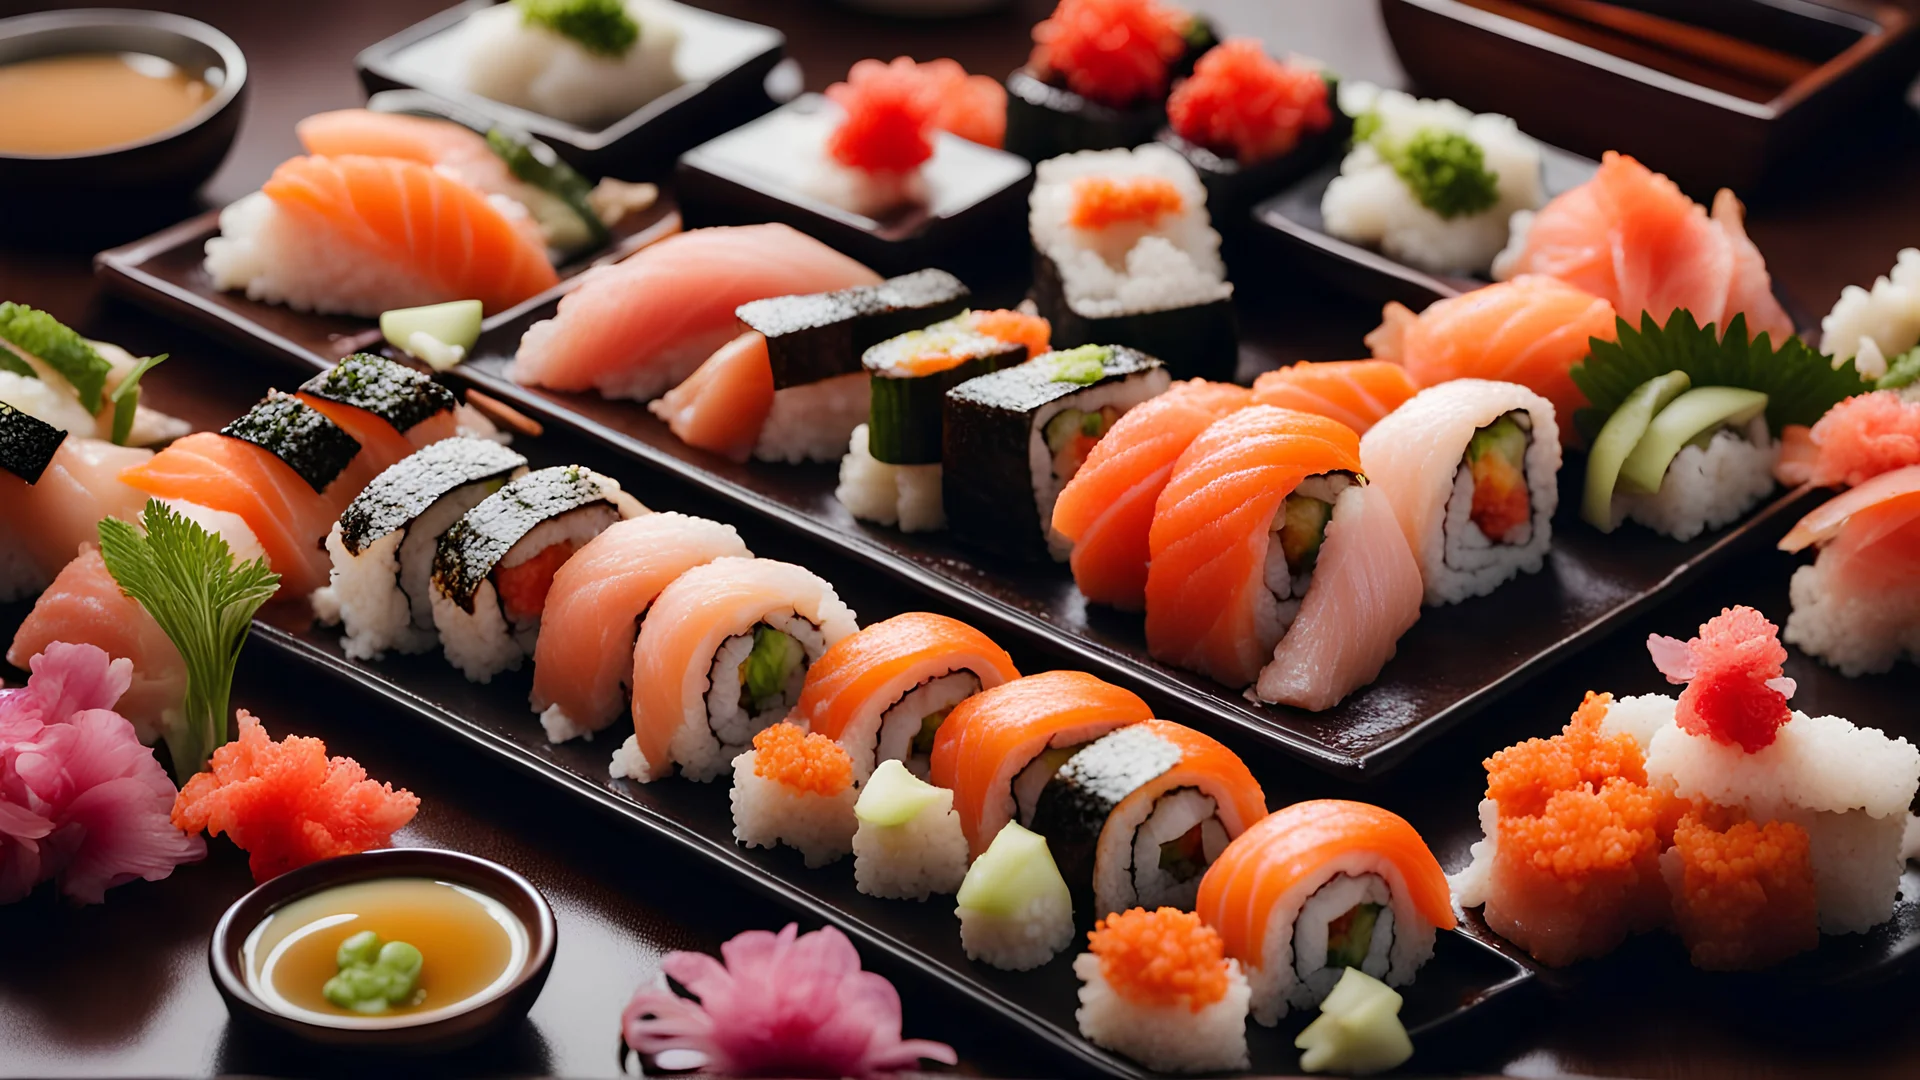 The image for the article displays a captivating shot of a beautifully arranged sushi dish ready for serving. Sushi is presented in an array of vibrant colors and appealing ingredients such as rice, fish, and vegetables, making it a picture that reflects the beauty and deliciousness of this Japanese dish.